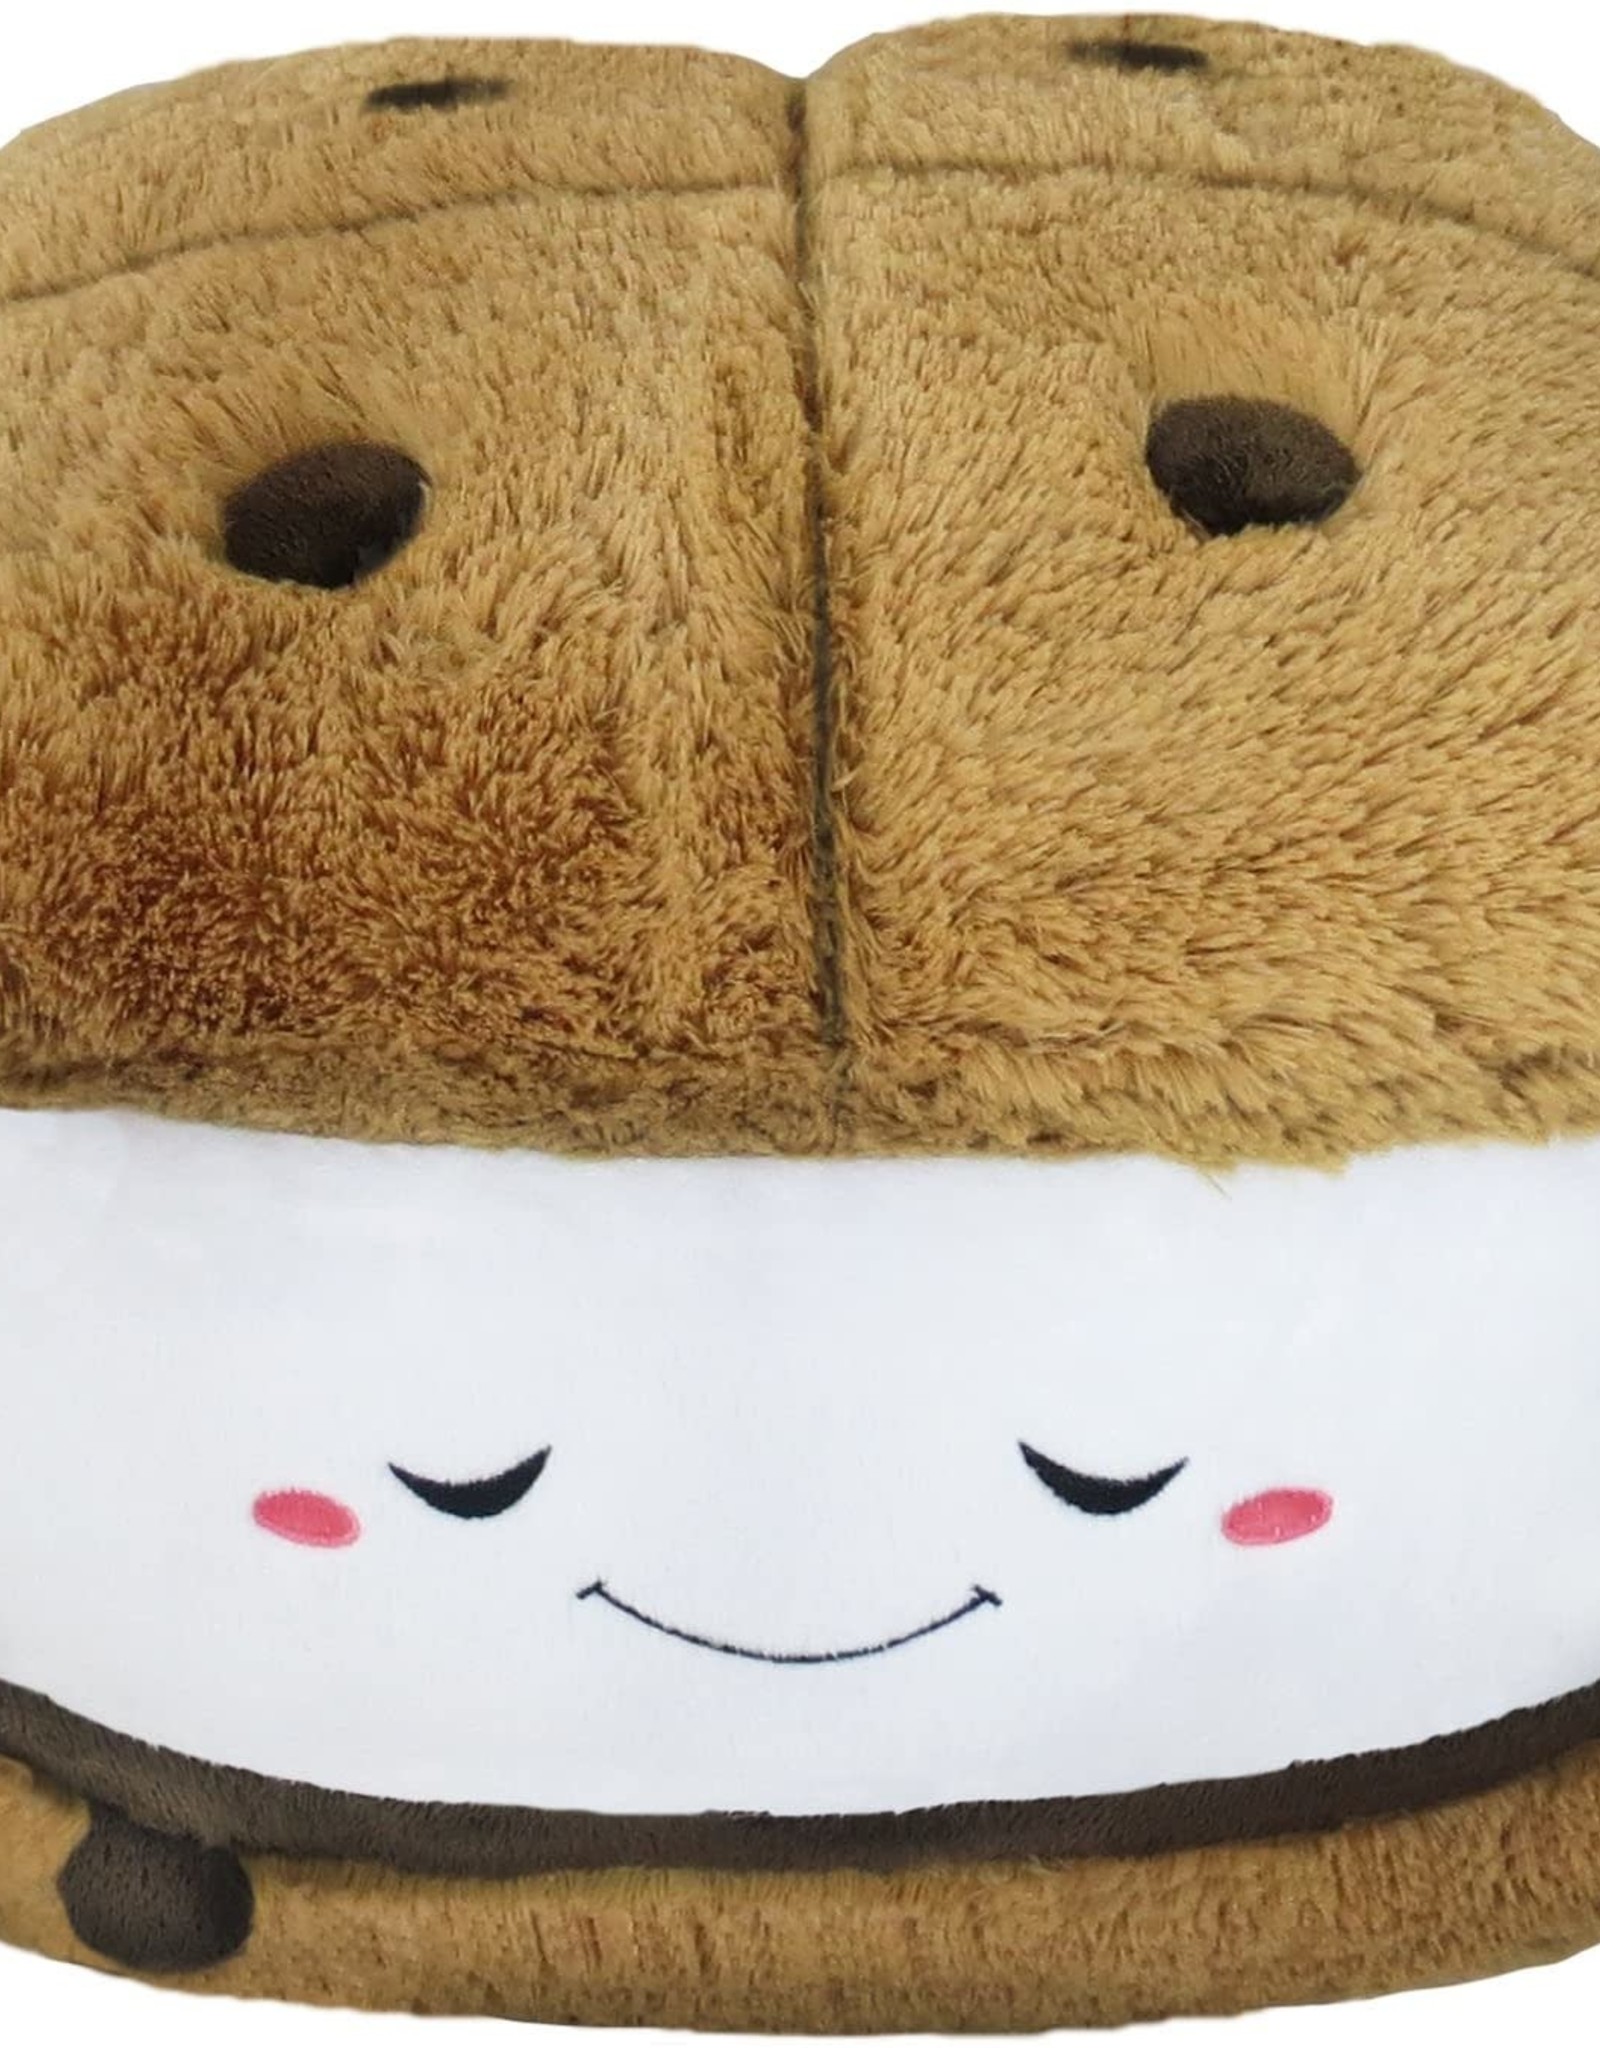 Squishable Comfort Food S'more